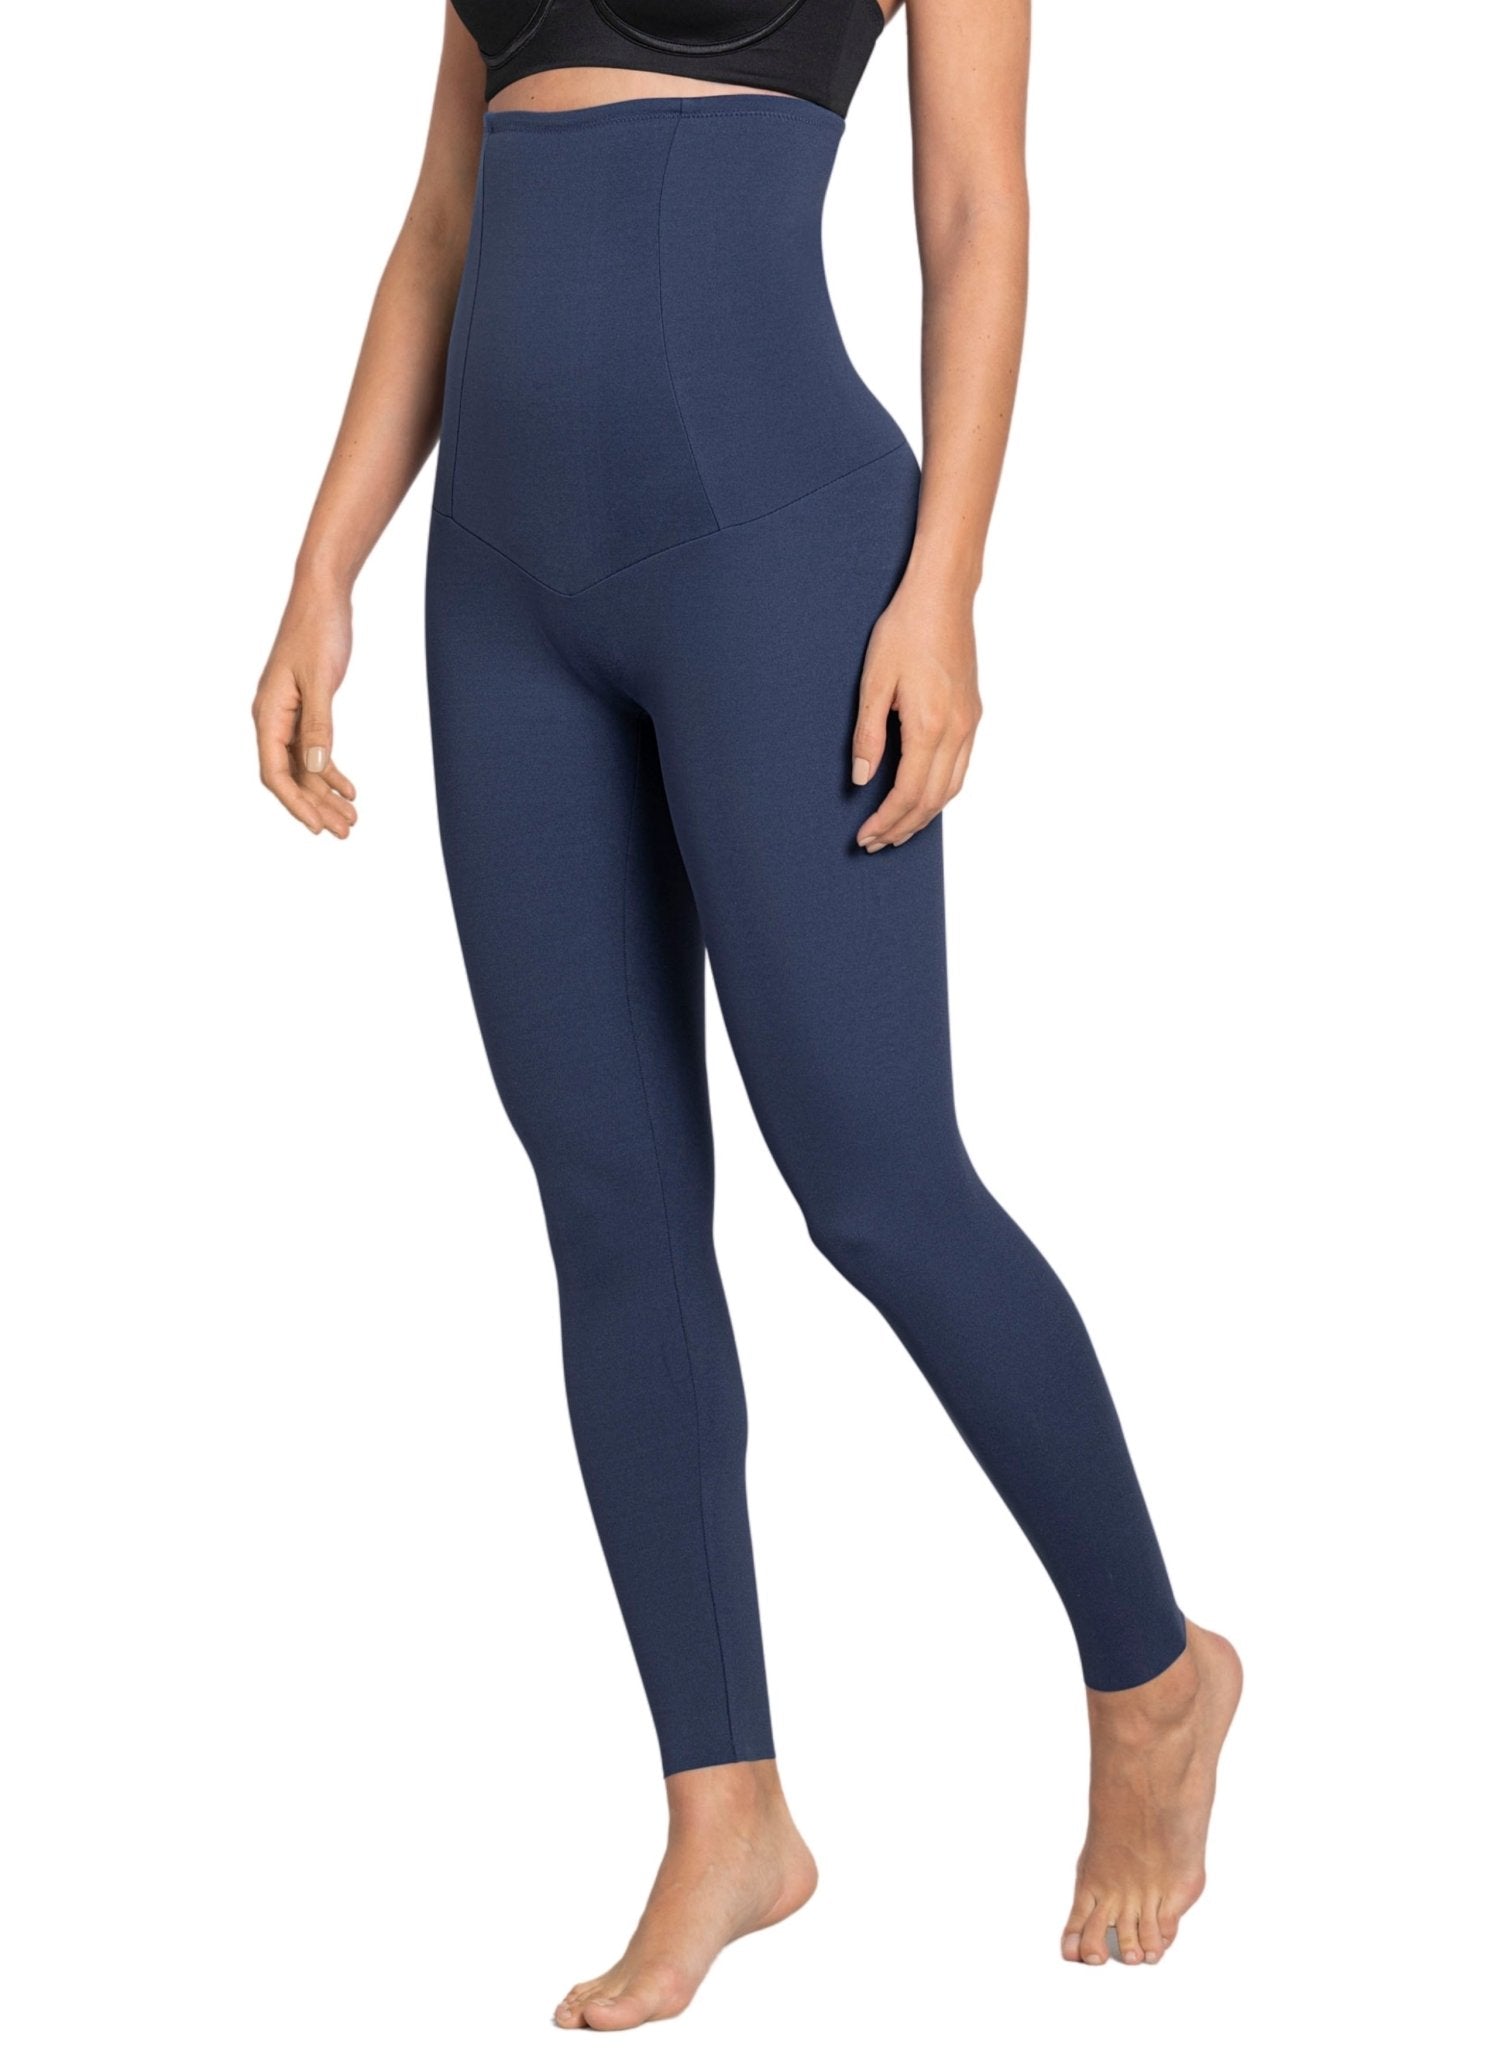 Extra High Waisted Firm Compression Legging - Blue